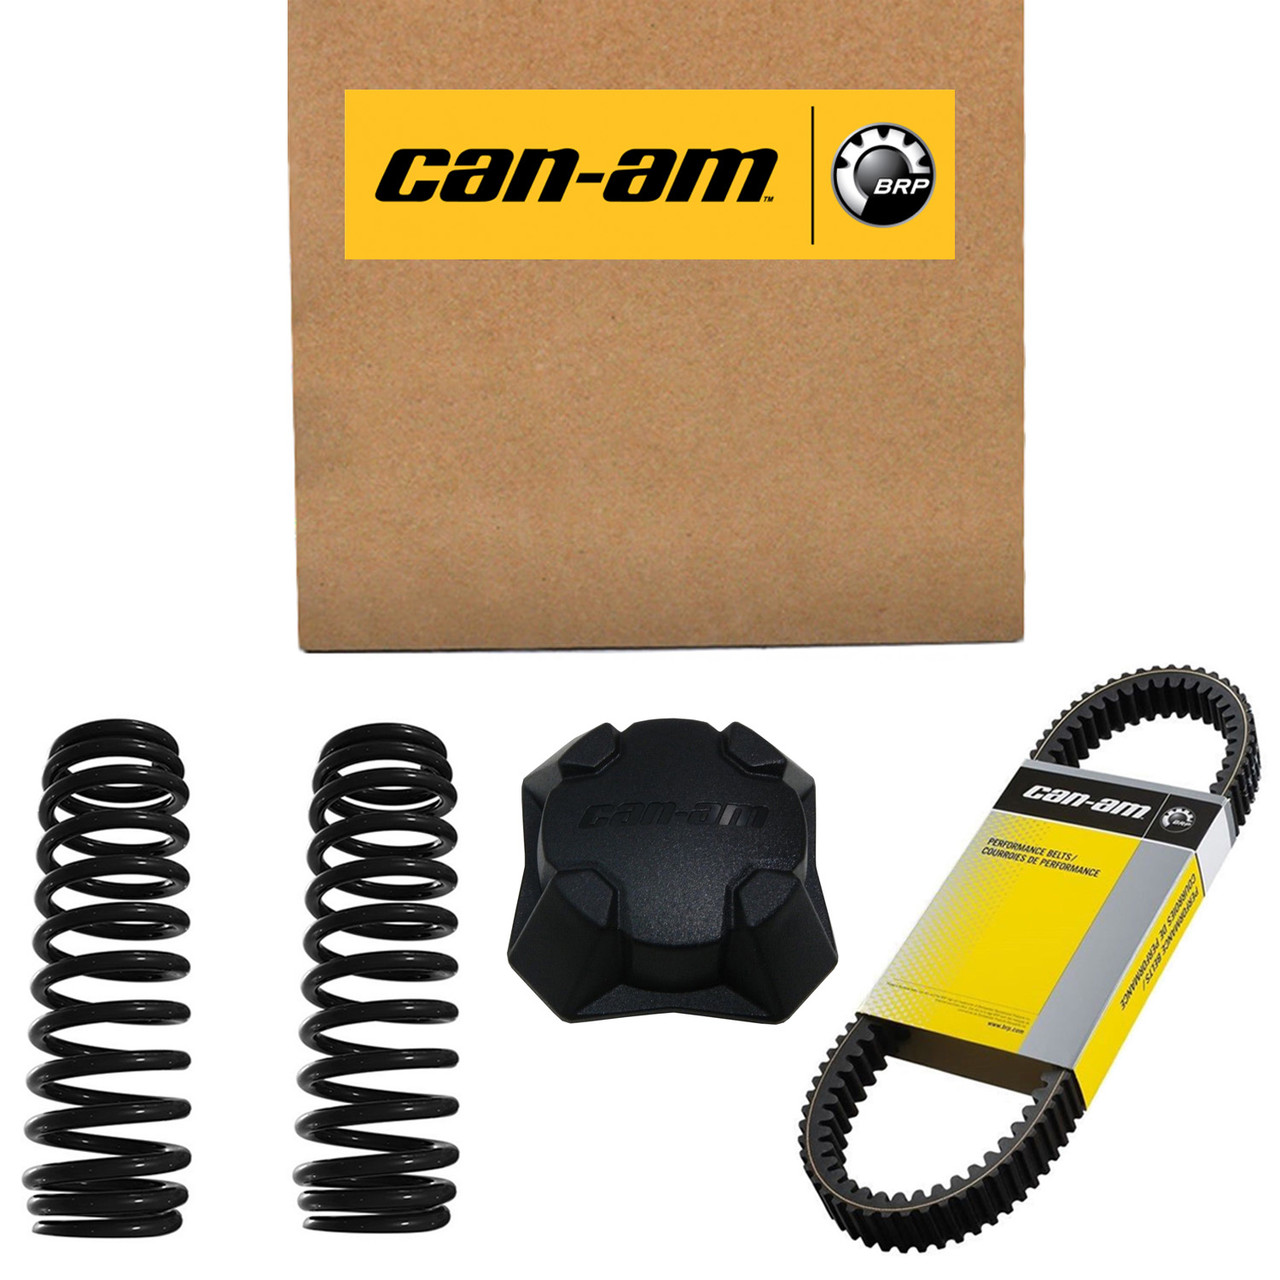 Can-Am New OEM Lh Acces Panel, 708400255